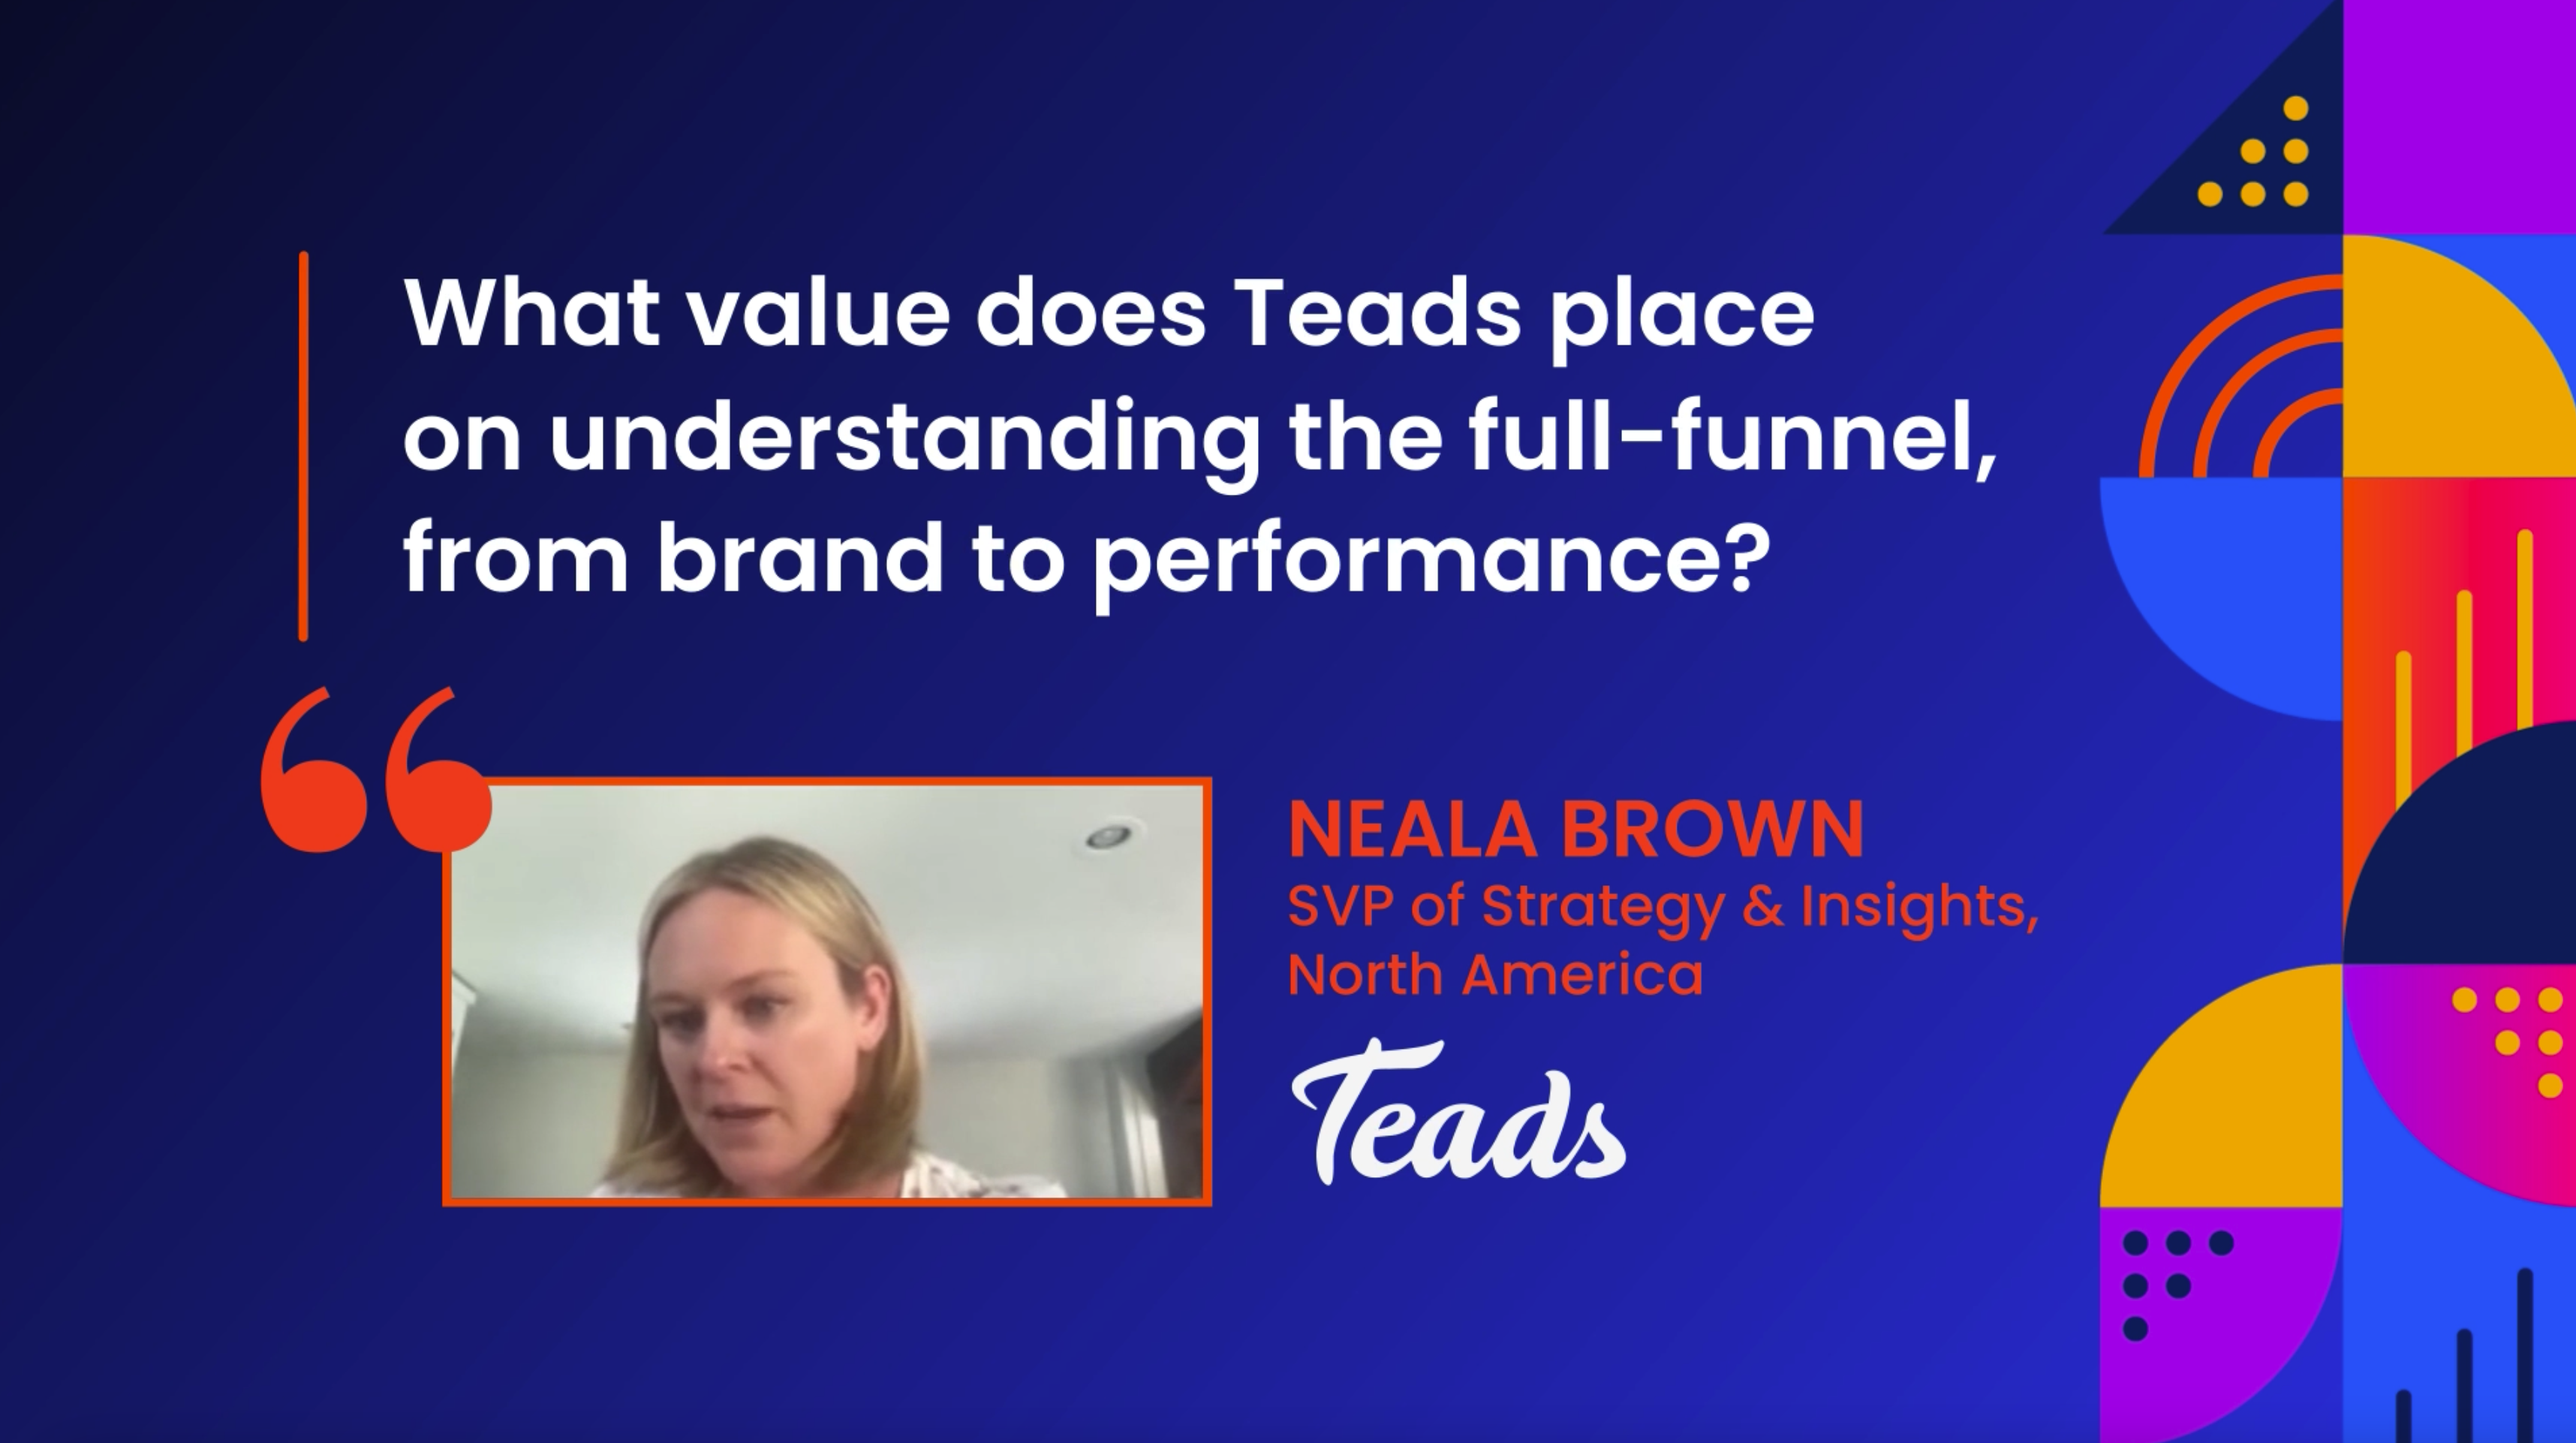 Image of a still from the Teads client video about understanding full-funnel.